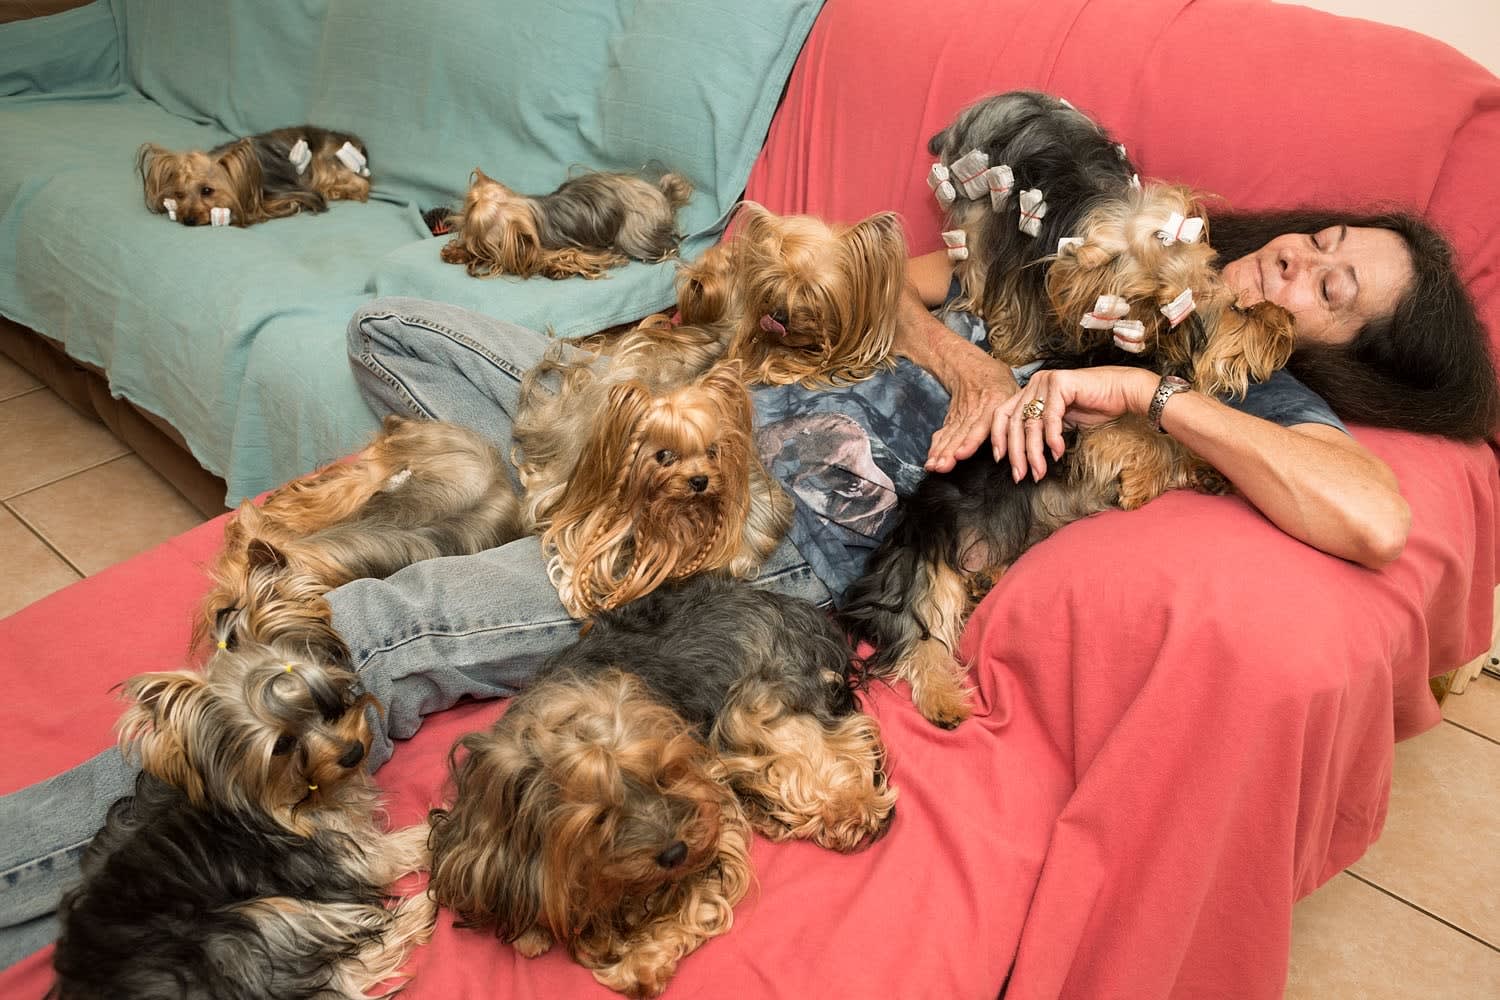 Sage Sohier, Nancy with Show Yorkies, Loxahatchee, Florida (from the series Peaceable Kingdom), 2013